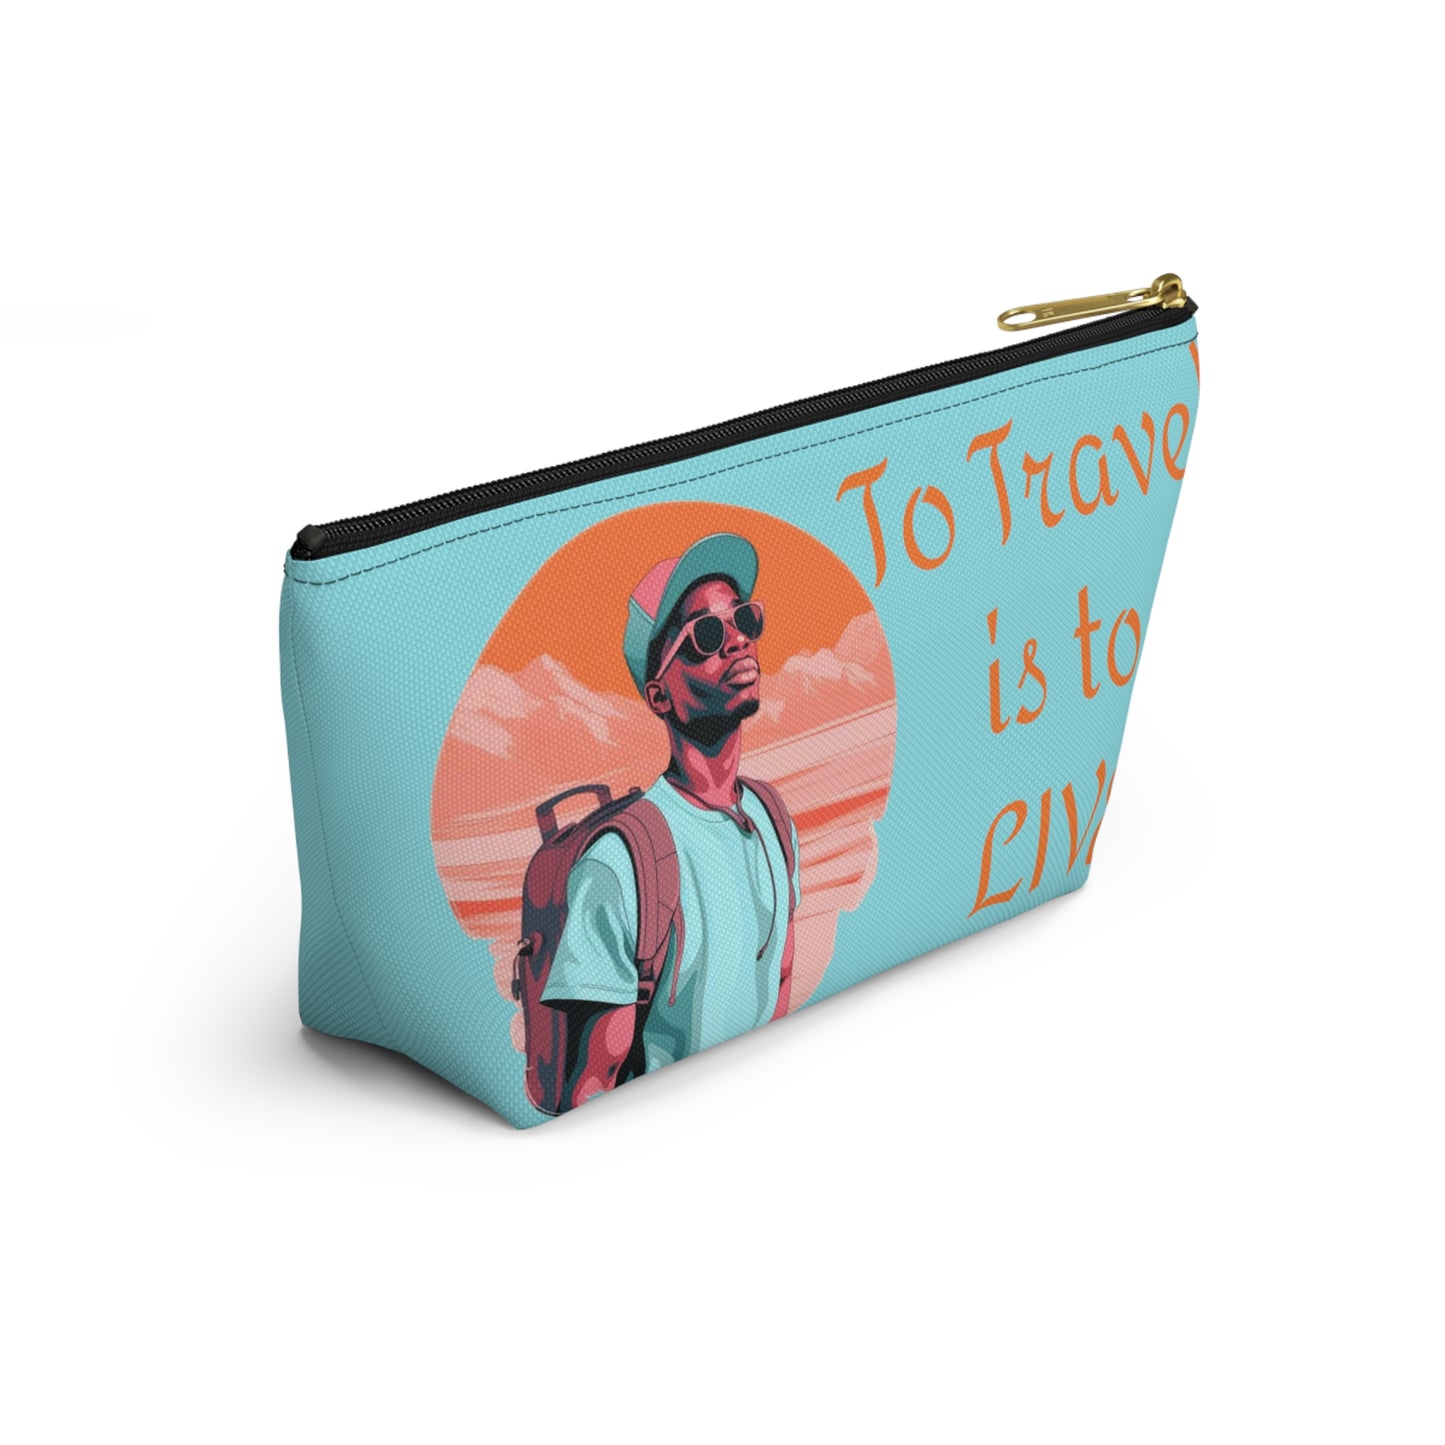 Travel-Ready Accessory Pouch with Inspiring Designs (TO TRAVEL IS TO LIVE)